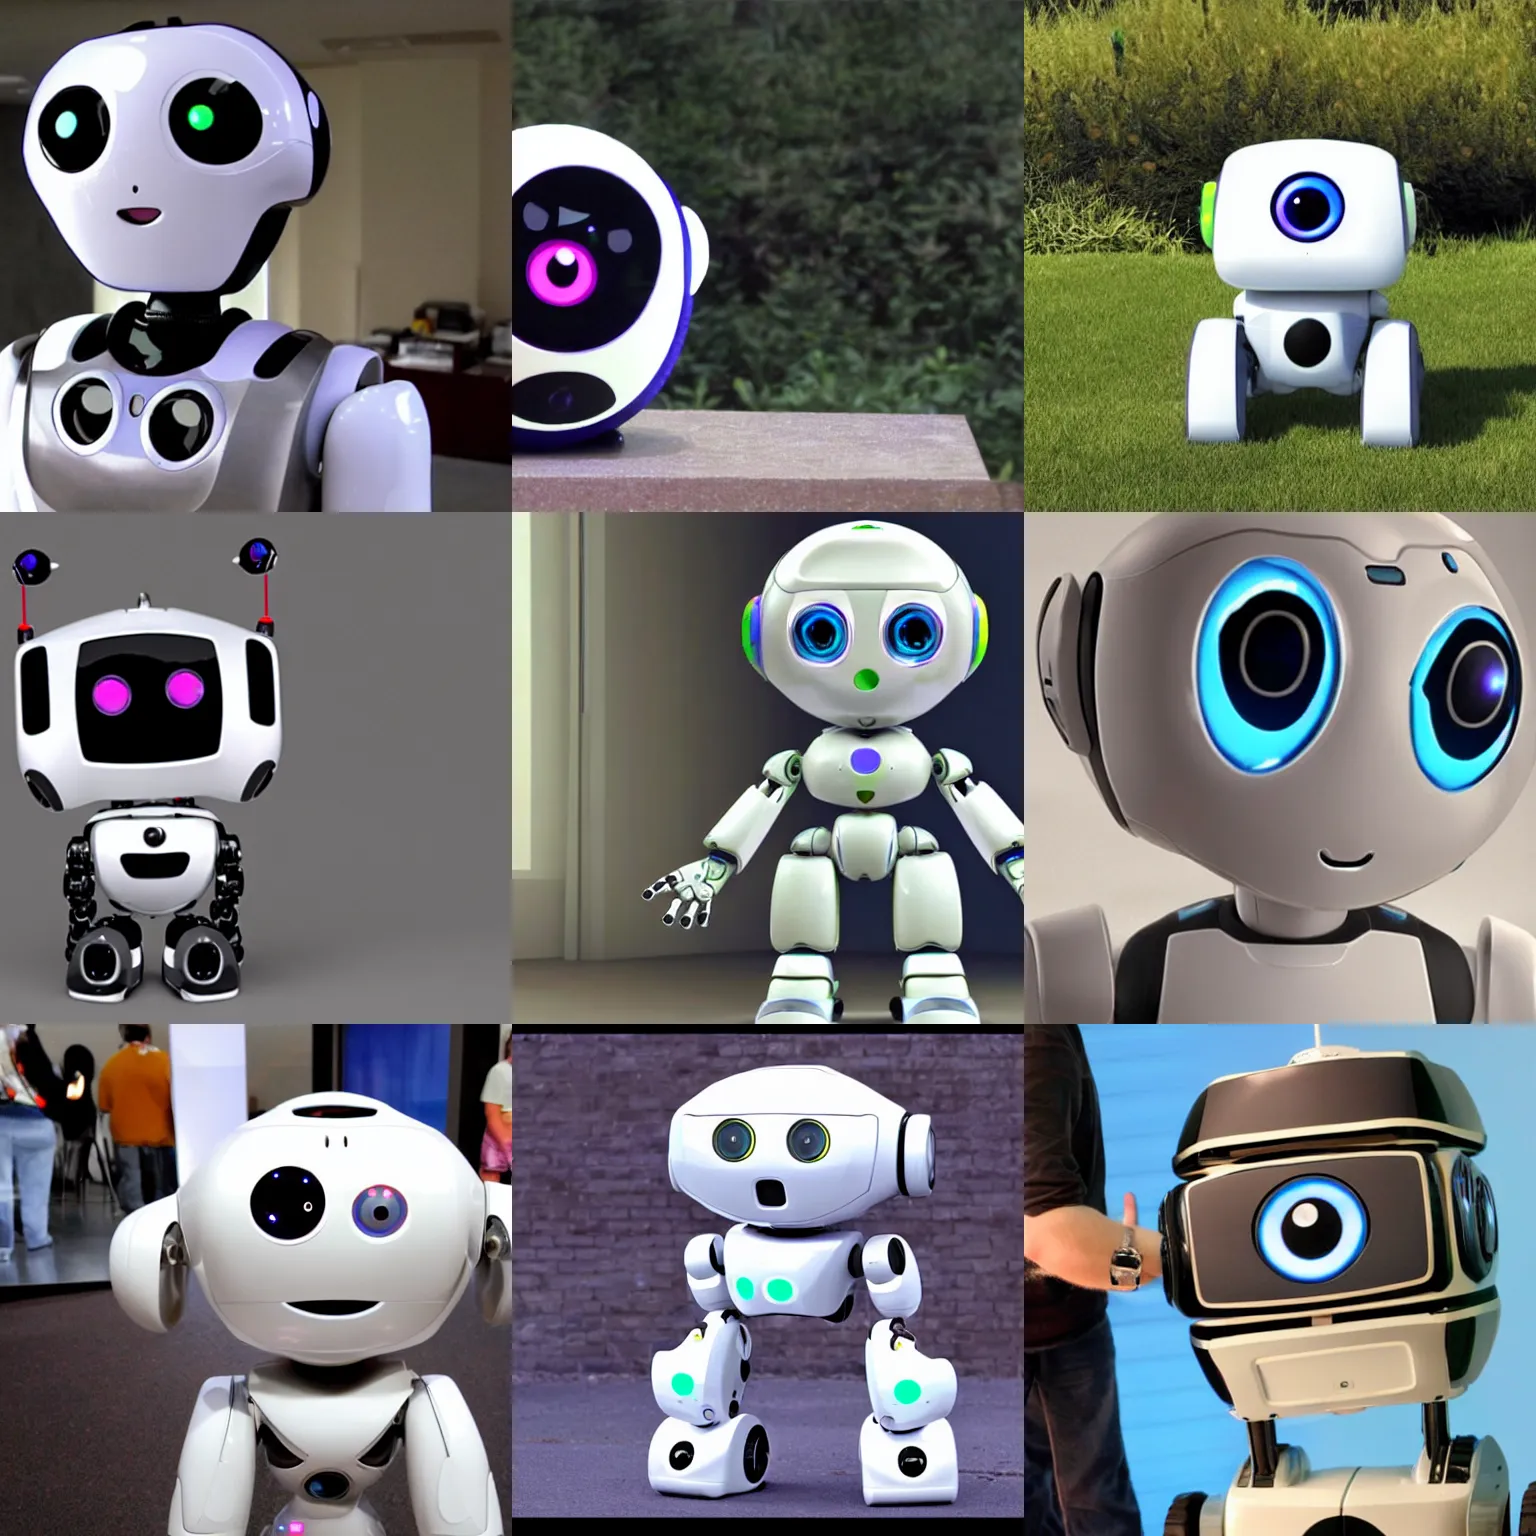 Prompt: <sd: cute friendly huggable robot looks into the camera with huge adorable eyes>i think this robot loves me